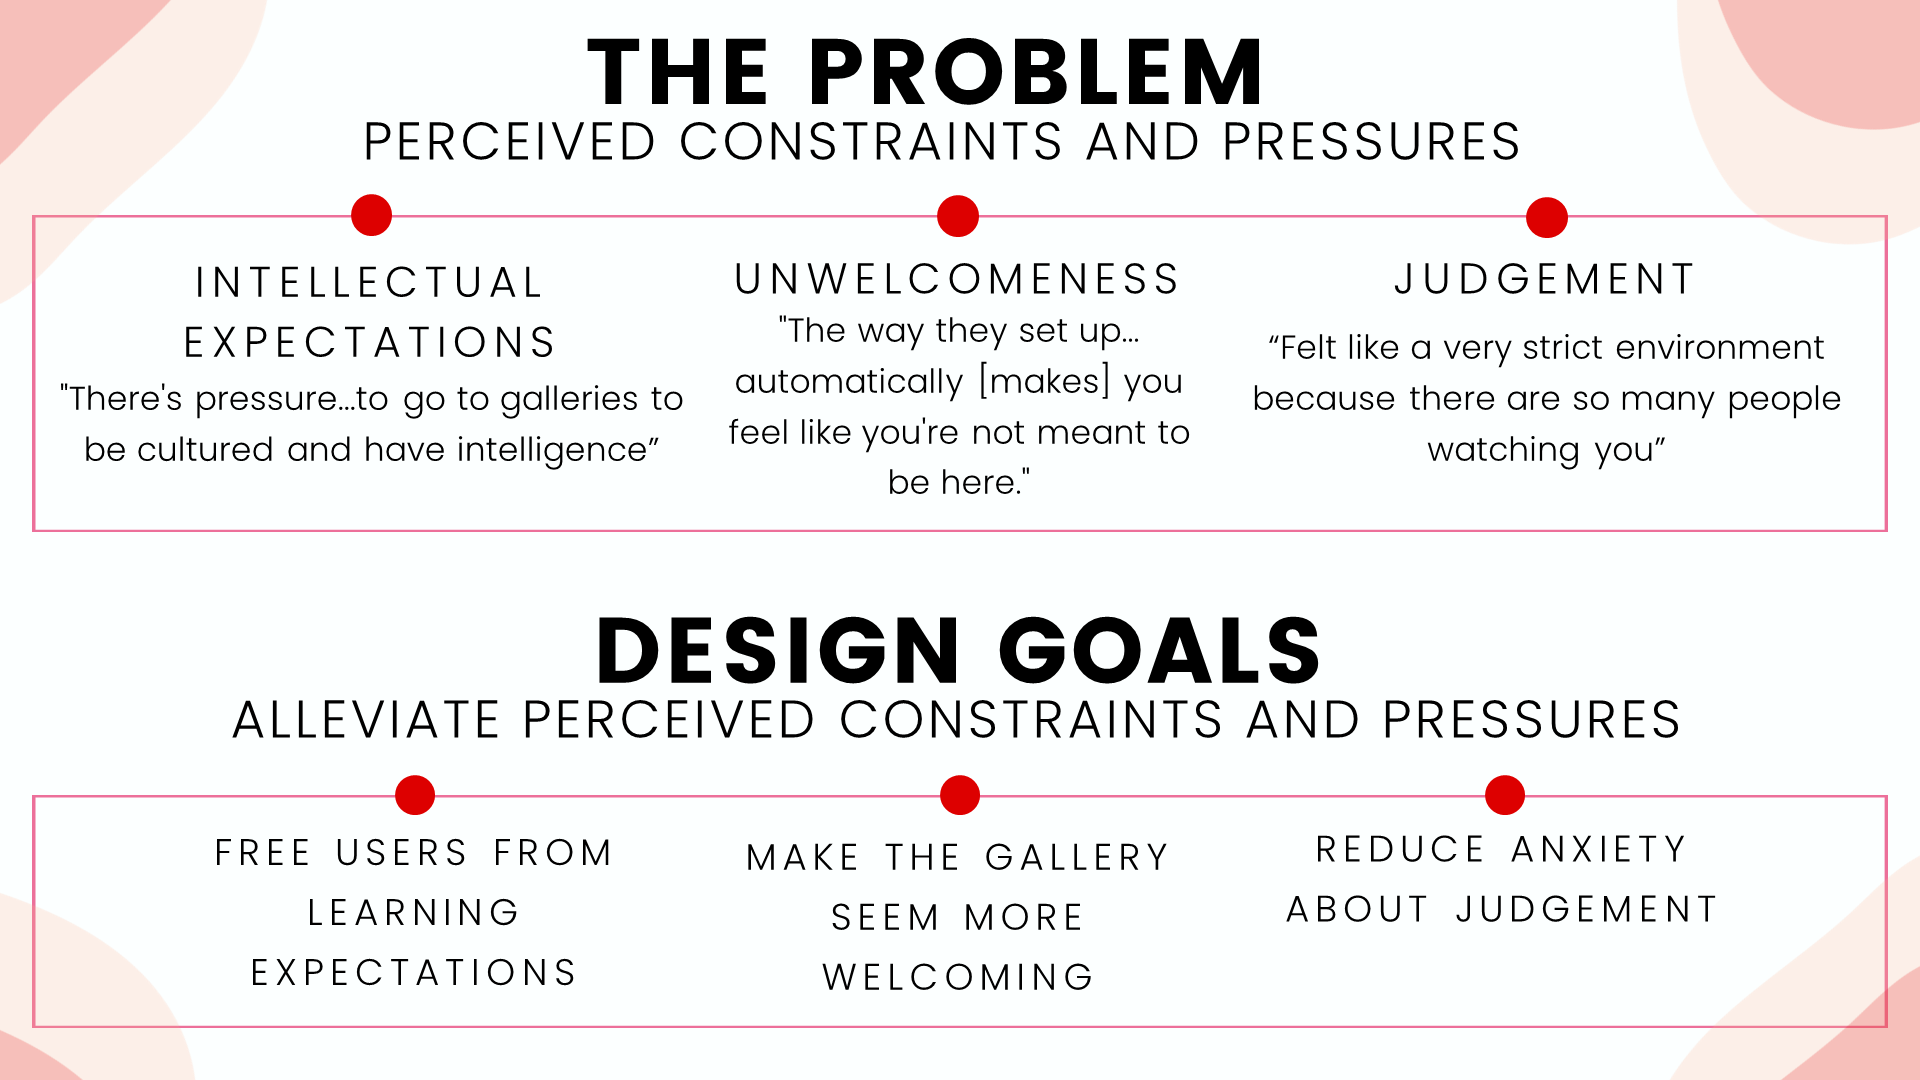 The problem - perceived constraints and pressures: intellectual expectations, unwelcomeness, judgement.